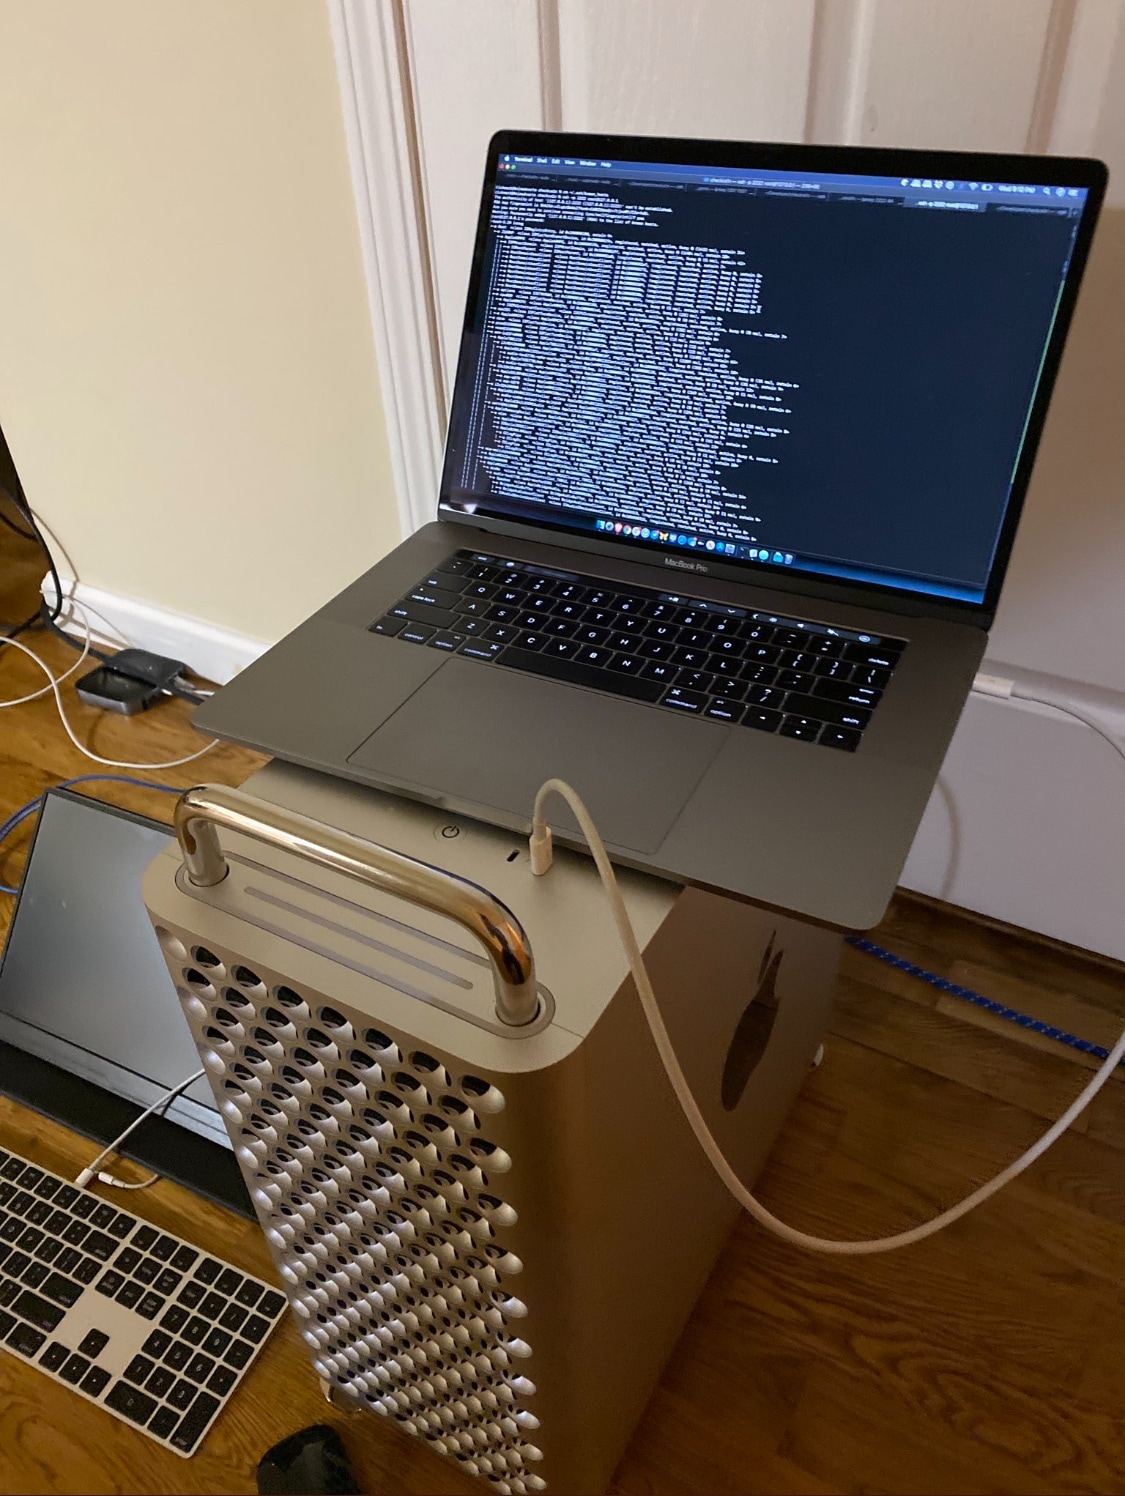 Checkra1n team teases pwned Mac Pro, 'the most expensive device 